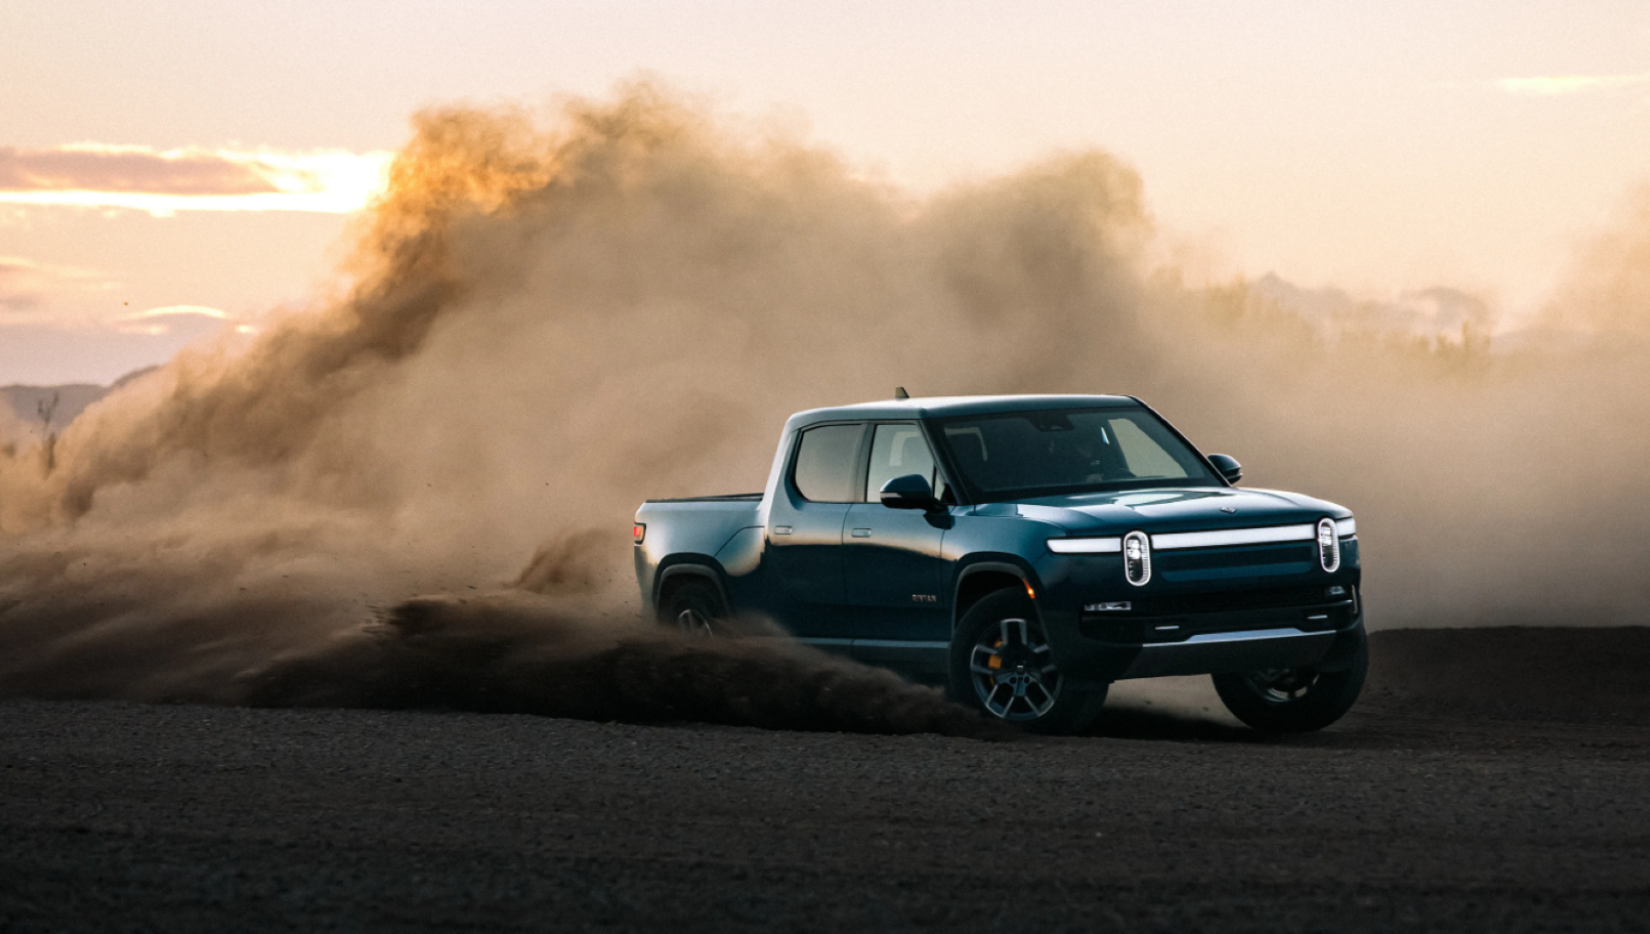 The Rivian R1T all-electric pickup truck model driving at dusk and kicking up dust clouds with its tires